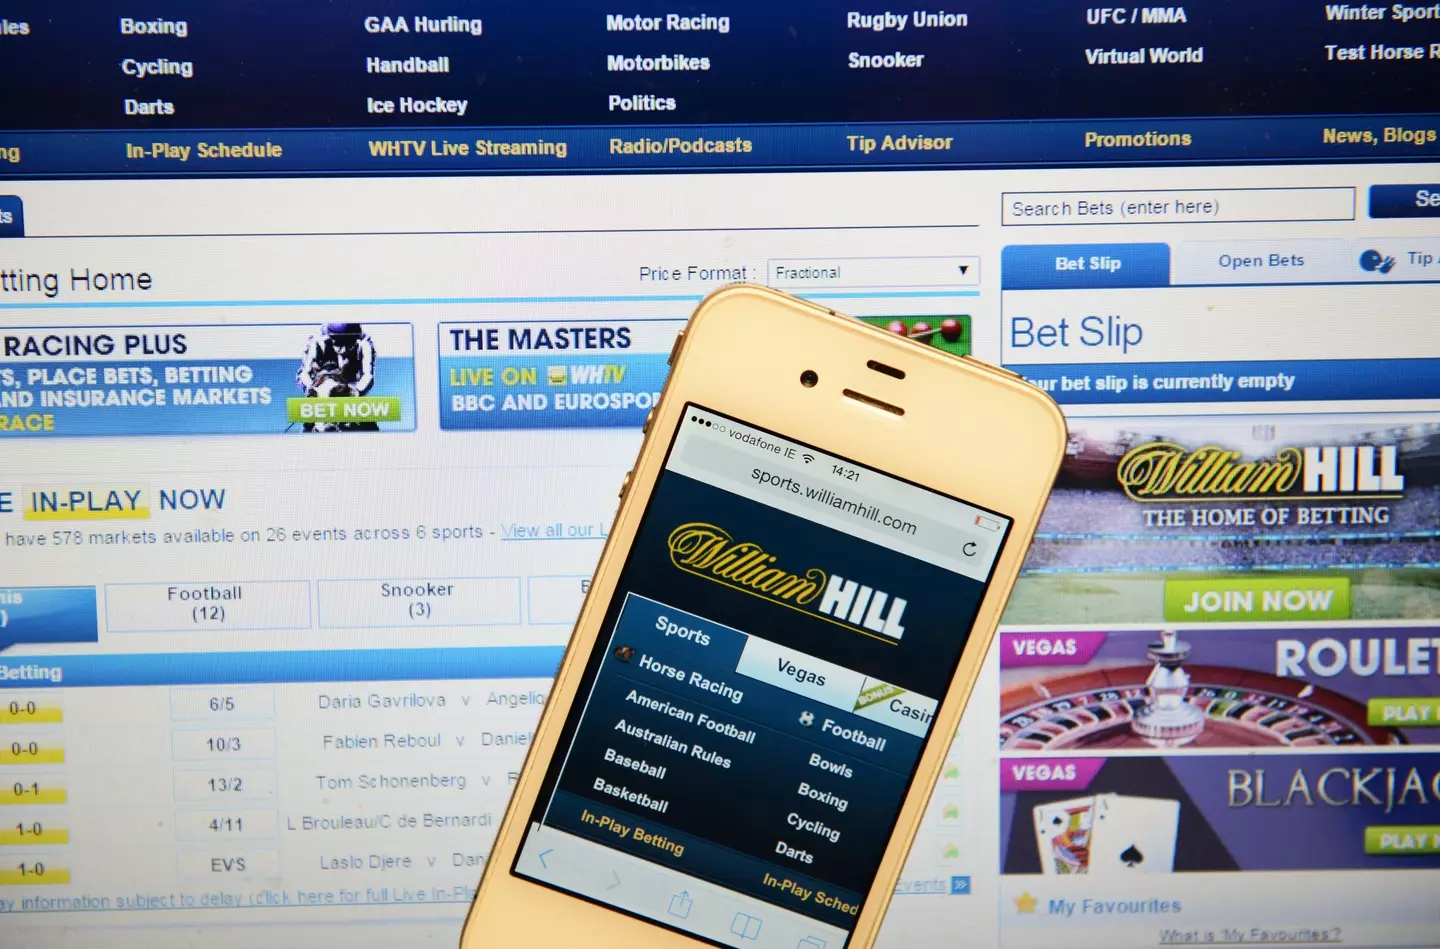 The gambling giant is being hit with a £19m fine.